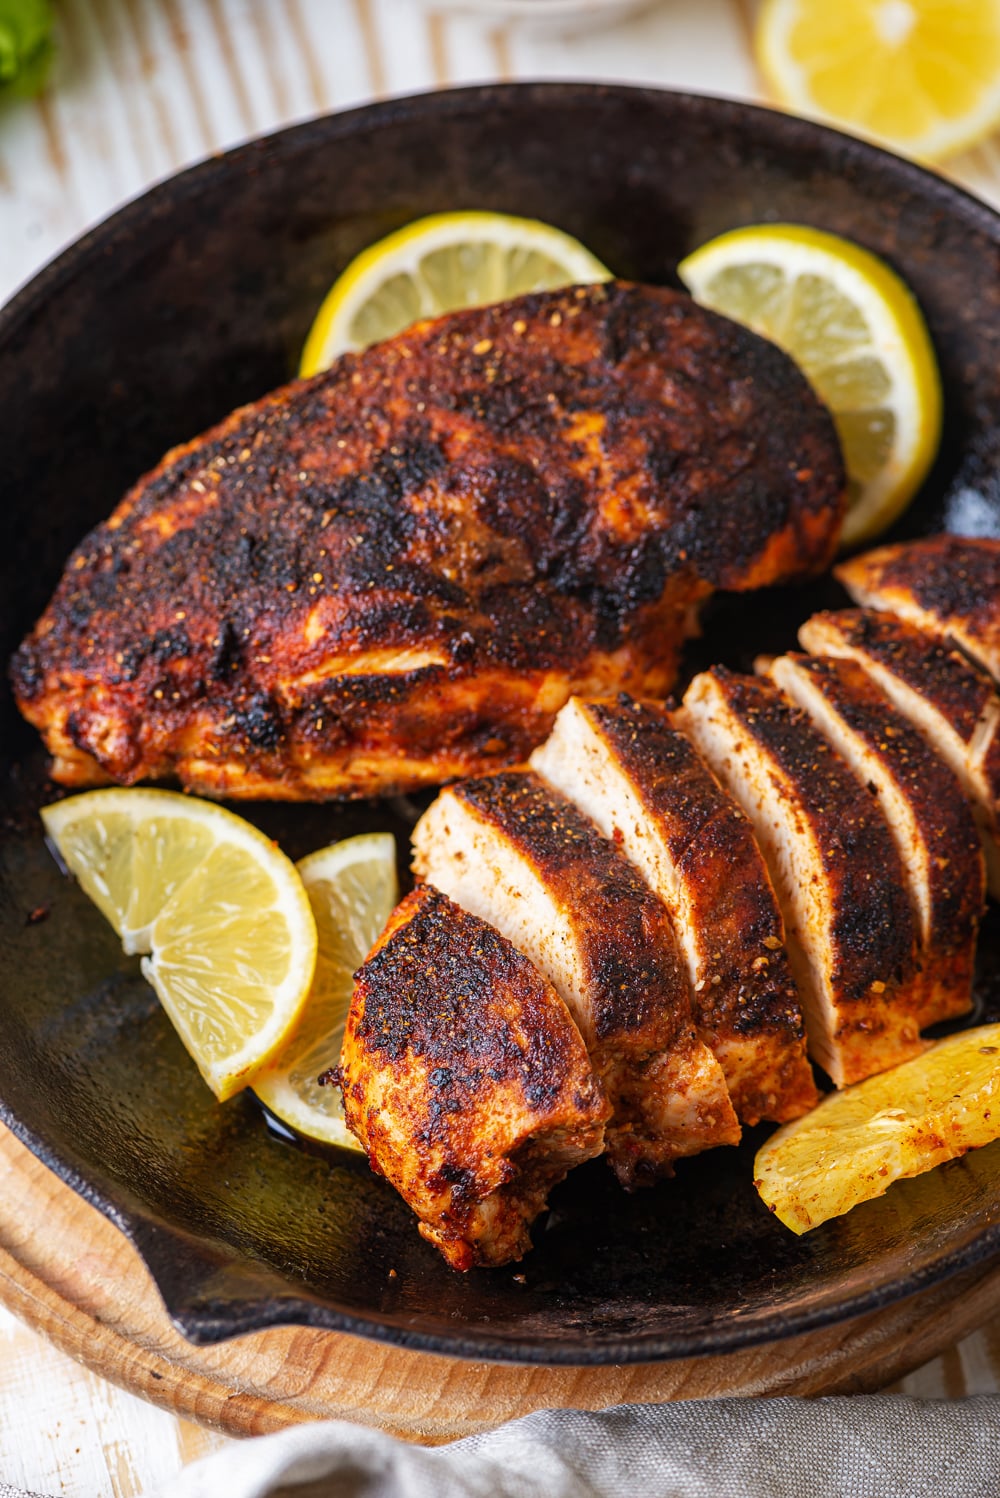 Two pieces of cooked blackened chicken in a skillet. The piece of chicken in the back of the skillet is whole and the front piece is cut into strips. There are slices of lemon around the chicken. The skillet is on a wooden saucer on a wood table.